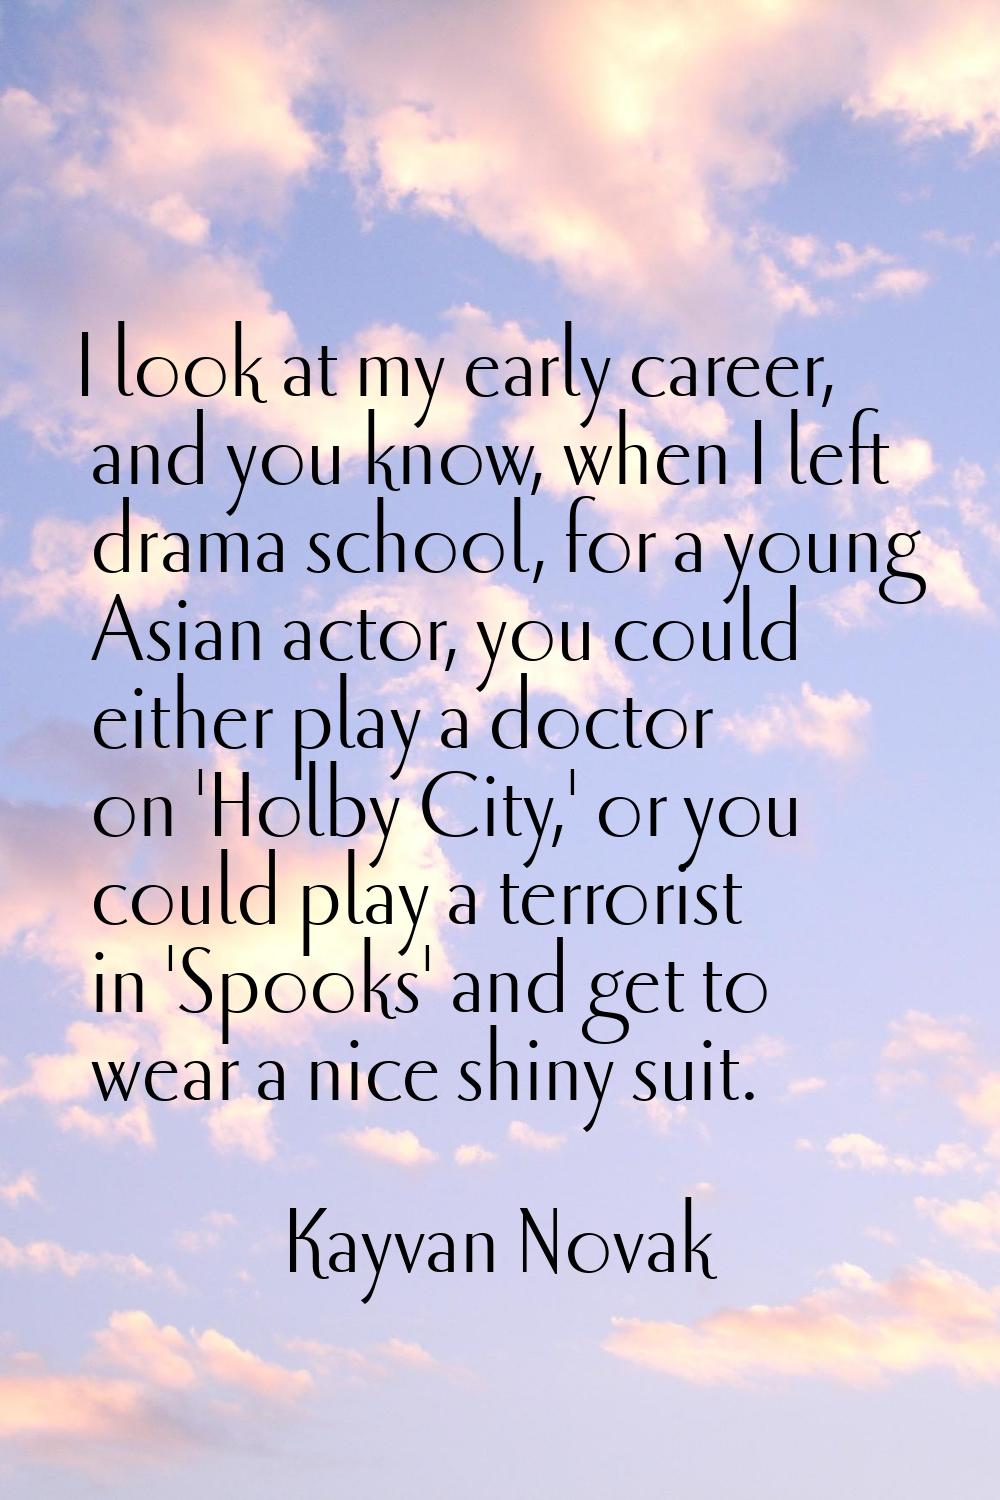 I look at my early career, and you know, when I left drama school, for a young Asian actor, you cou